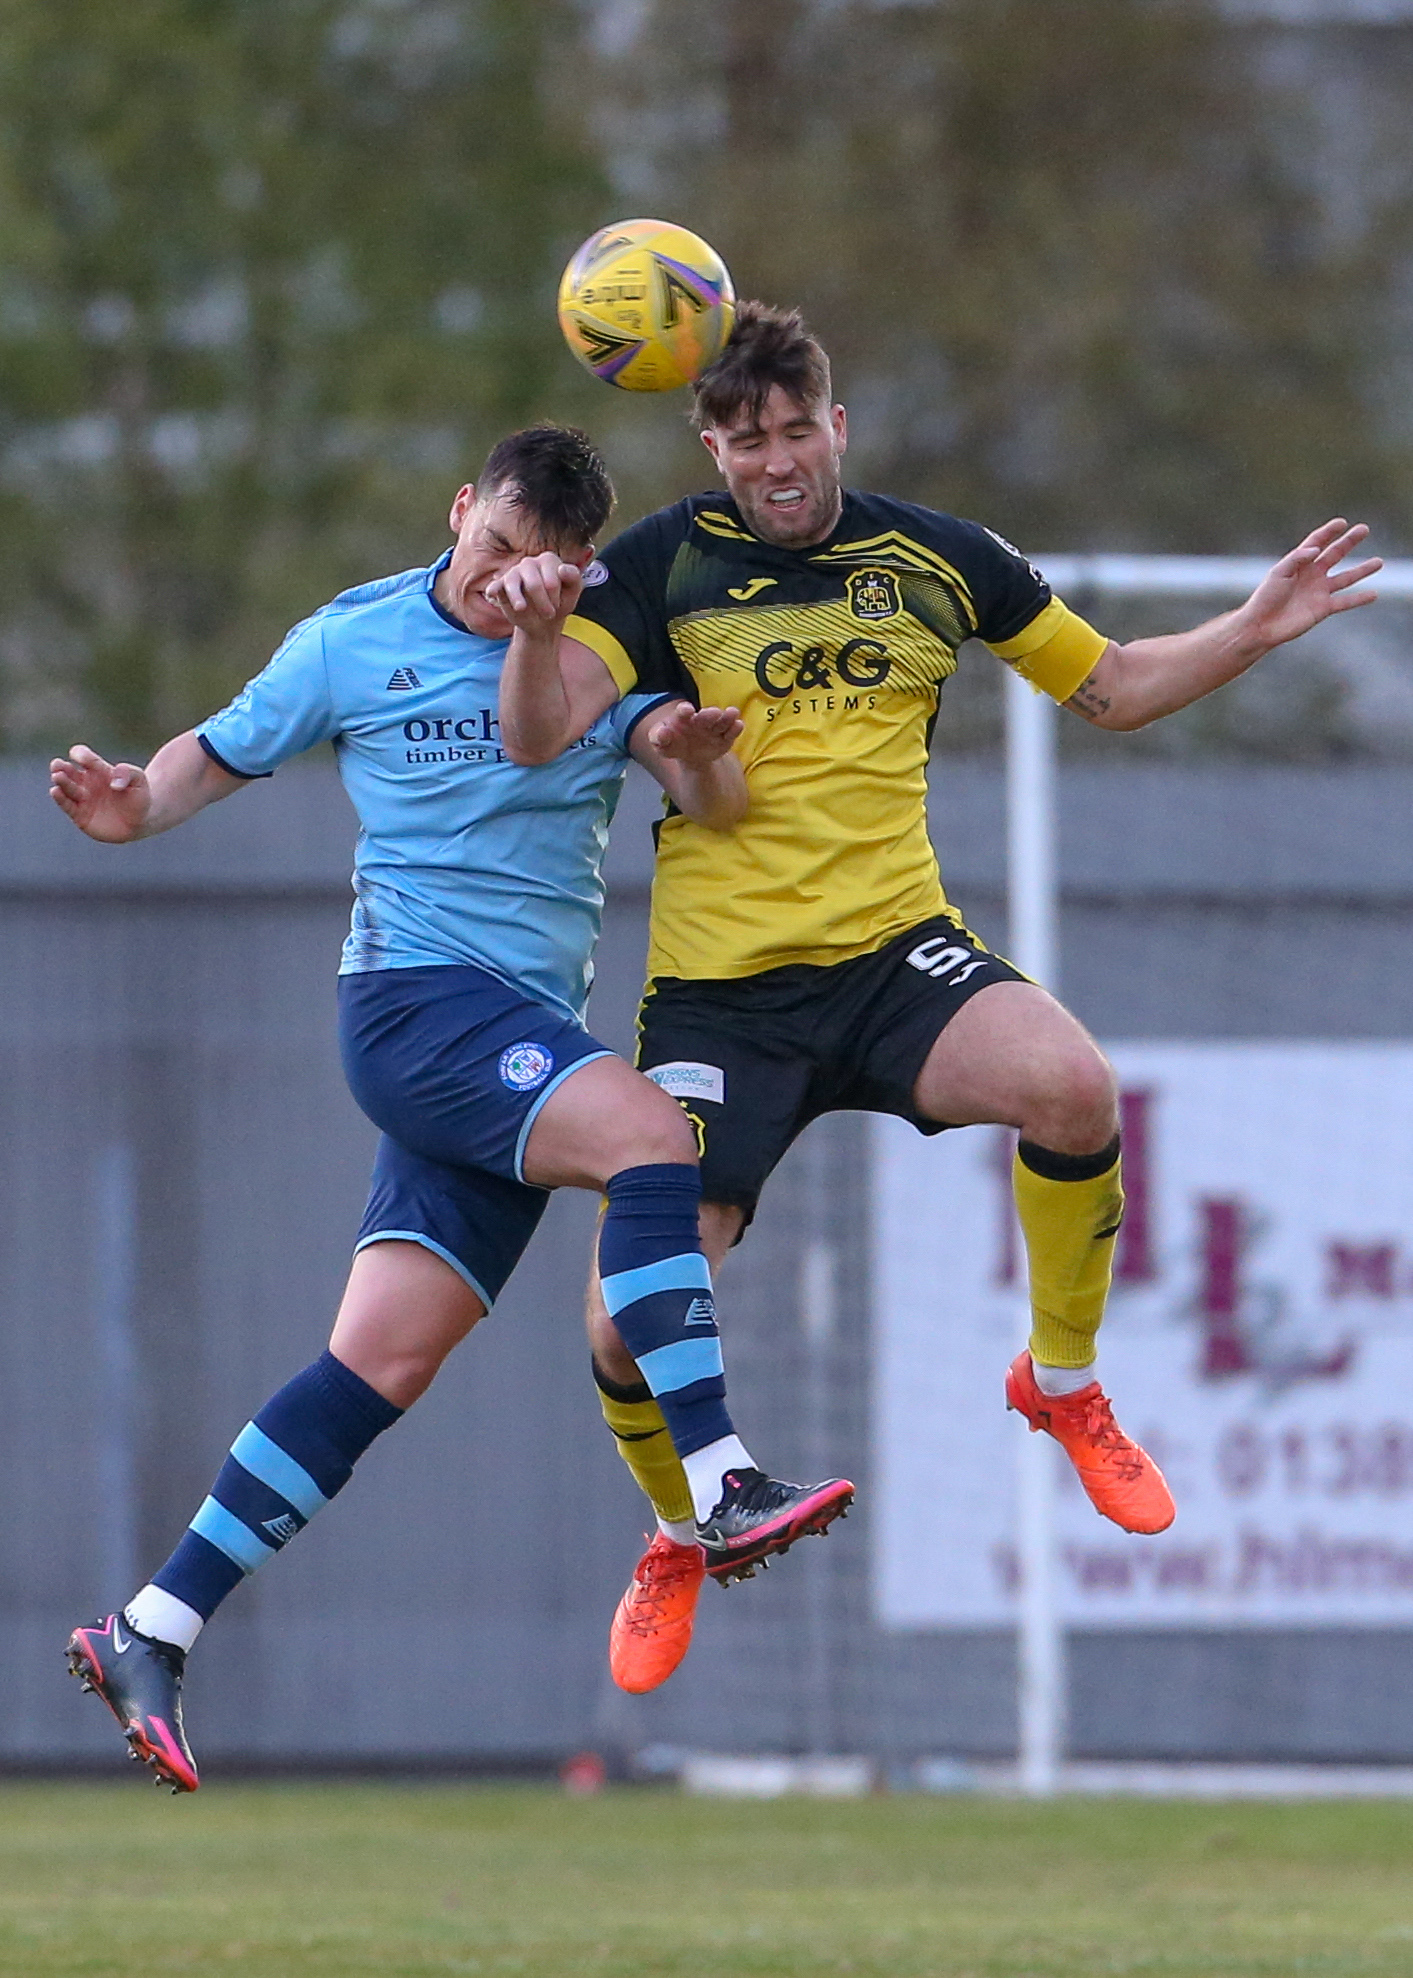 Dumbarton secured what could be a priceless three points in the battle to avoid the drop to League Two by beating Forfar 1-0 at the C&G Systems Stadium on Tuesday night (Photo - Andy Scott)